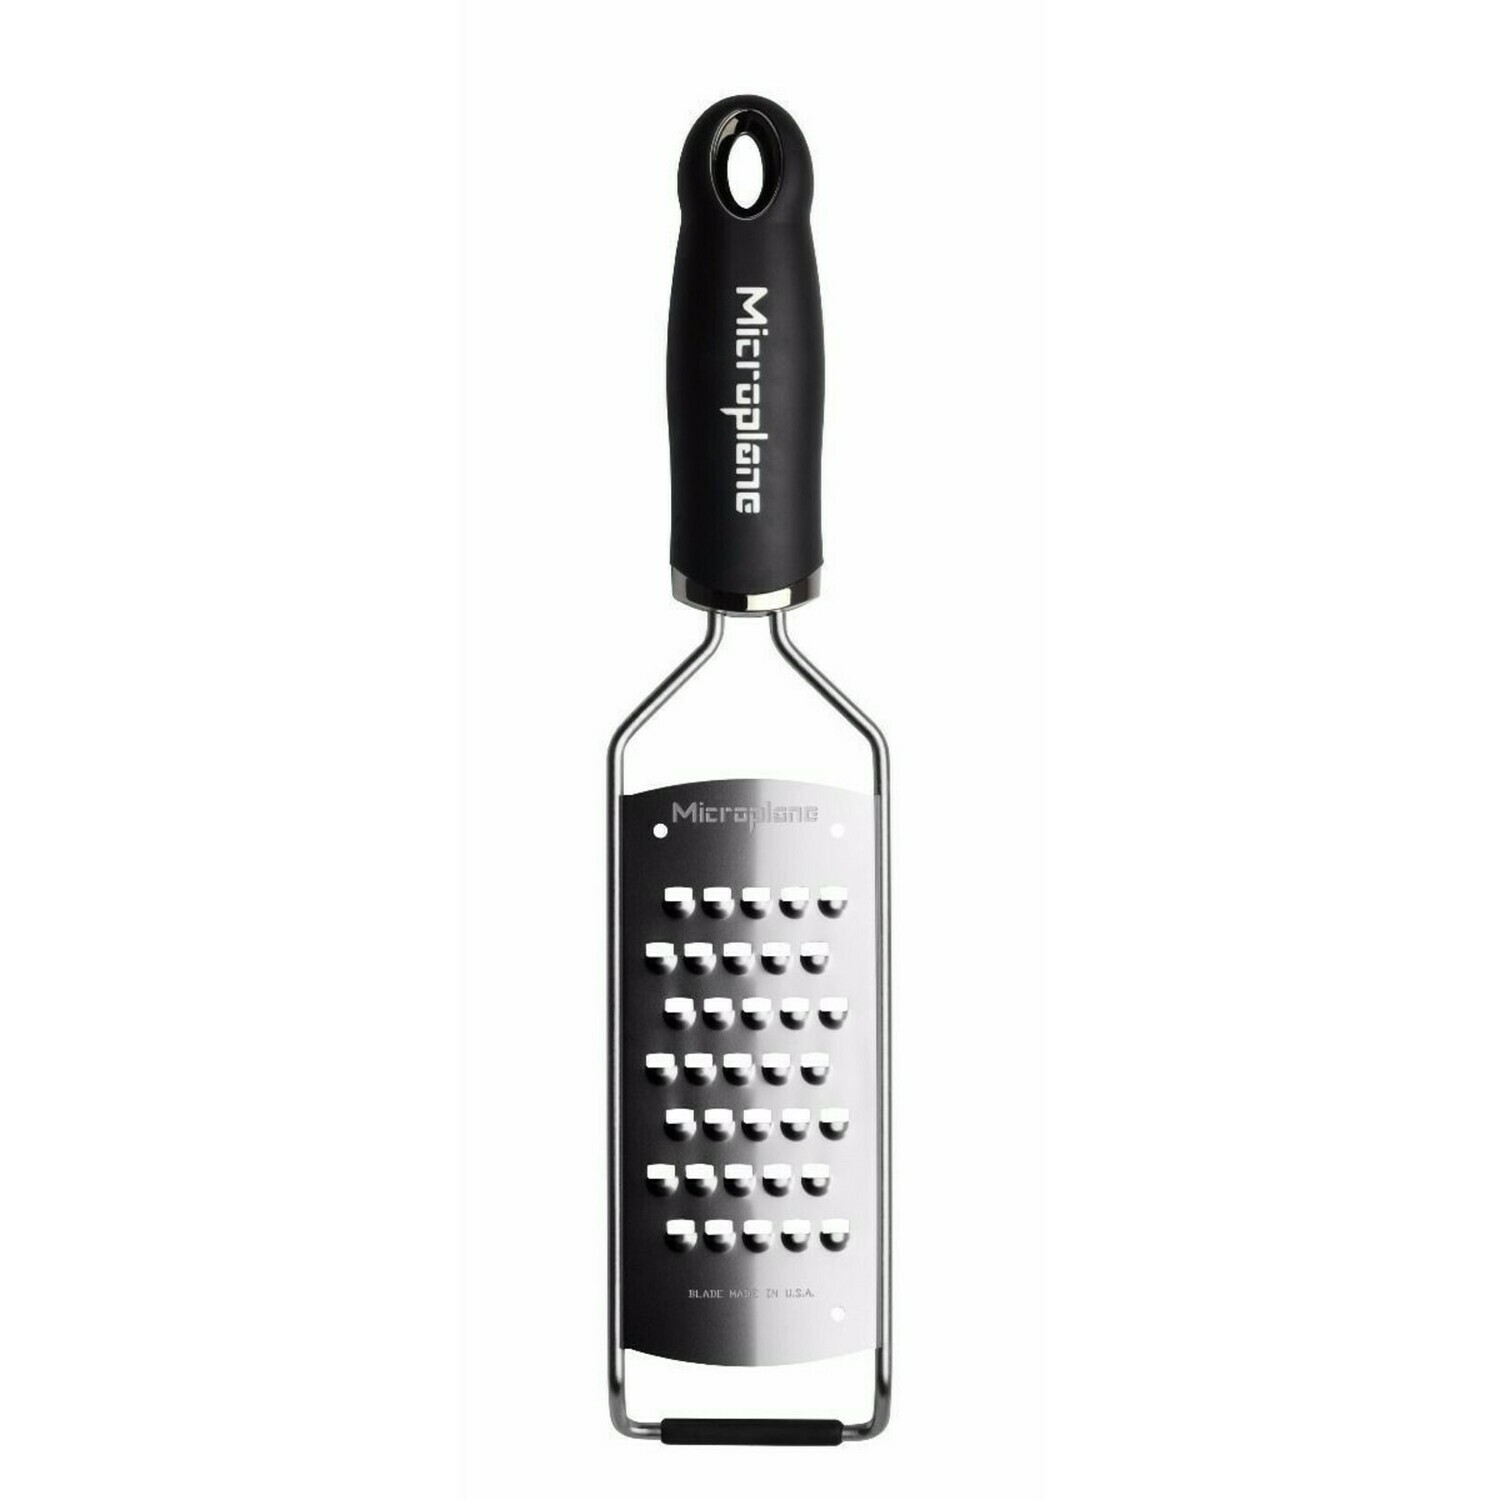 râpe gourmet extra grossière microplane